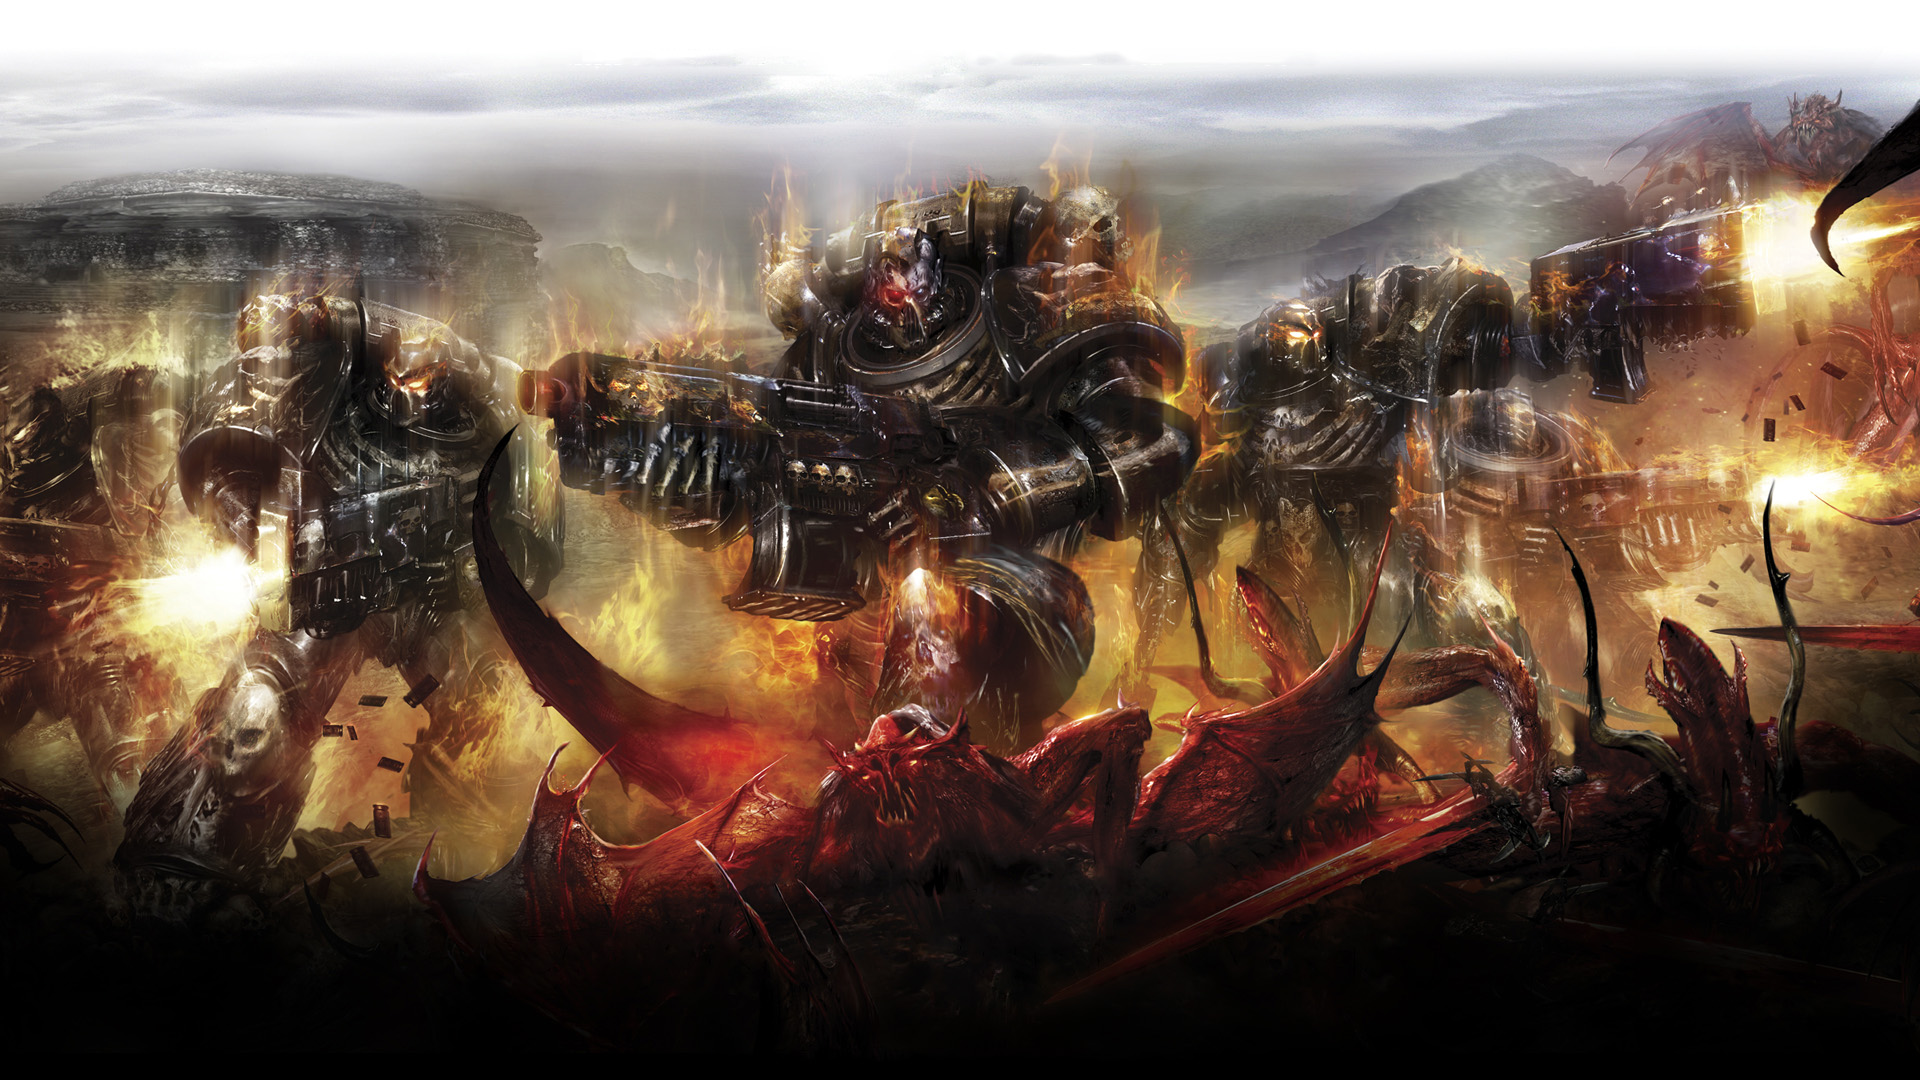 Warhammer 40K HD Wallpapers and Backgrounds